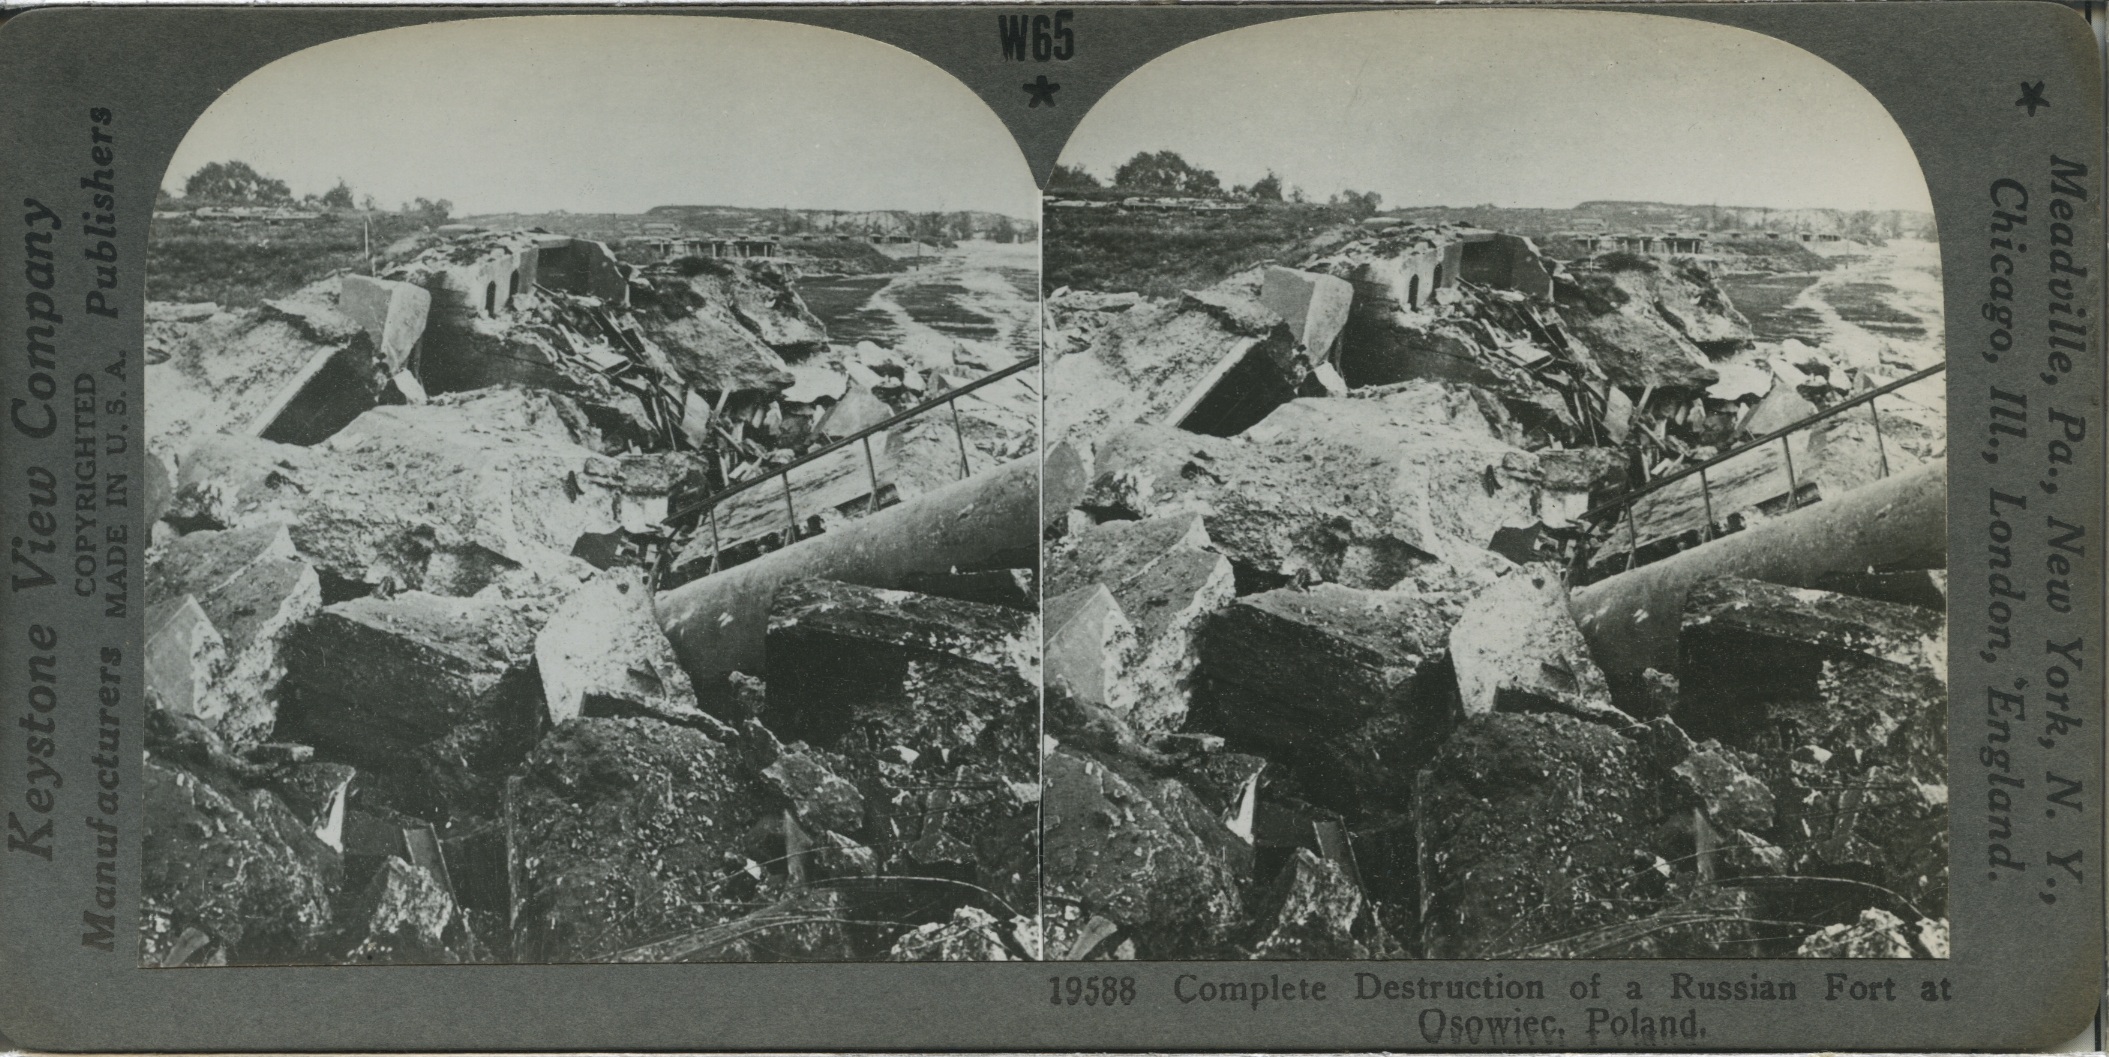 Complete Destruction of a Russian Fort at Osowiec, Poland